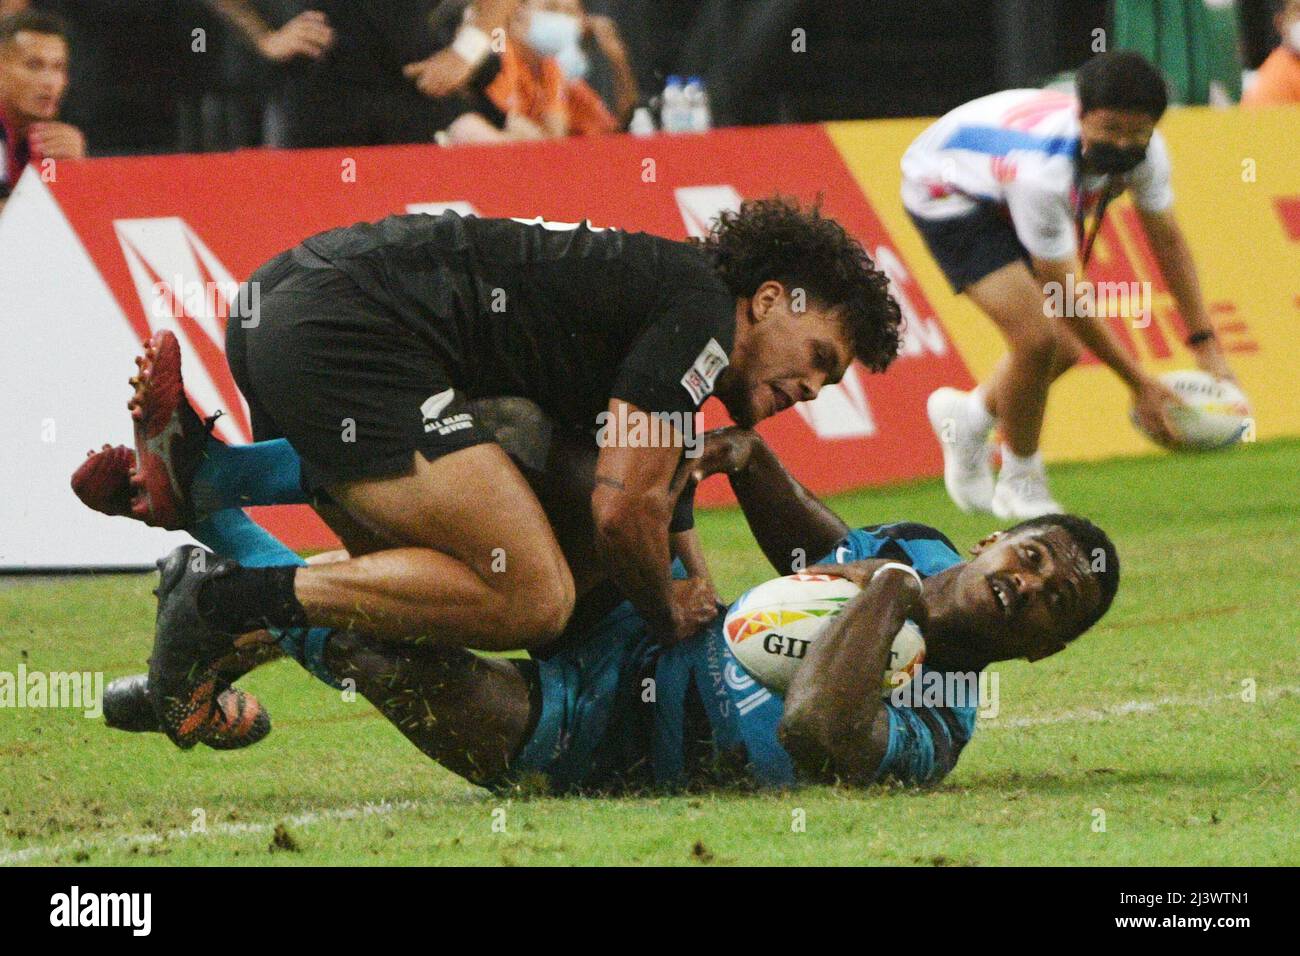 Singapore. 10th Apr, 2022. Kaminieli Rasaku (bottom) of Fiji competes during the final between New Zealand and Fiji at the HSBC World Rugby Sevens Singapore stop, held in the National Stadium on April 10, 2022. Credit: Then Chih Wey/Xinhua/Alamy Live News Stock Photo